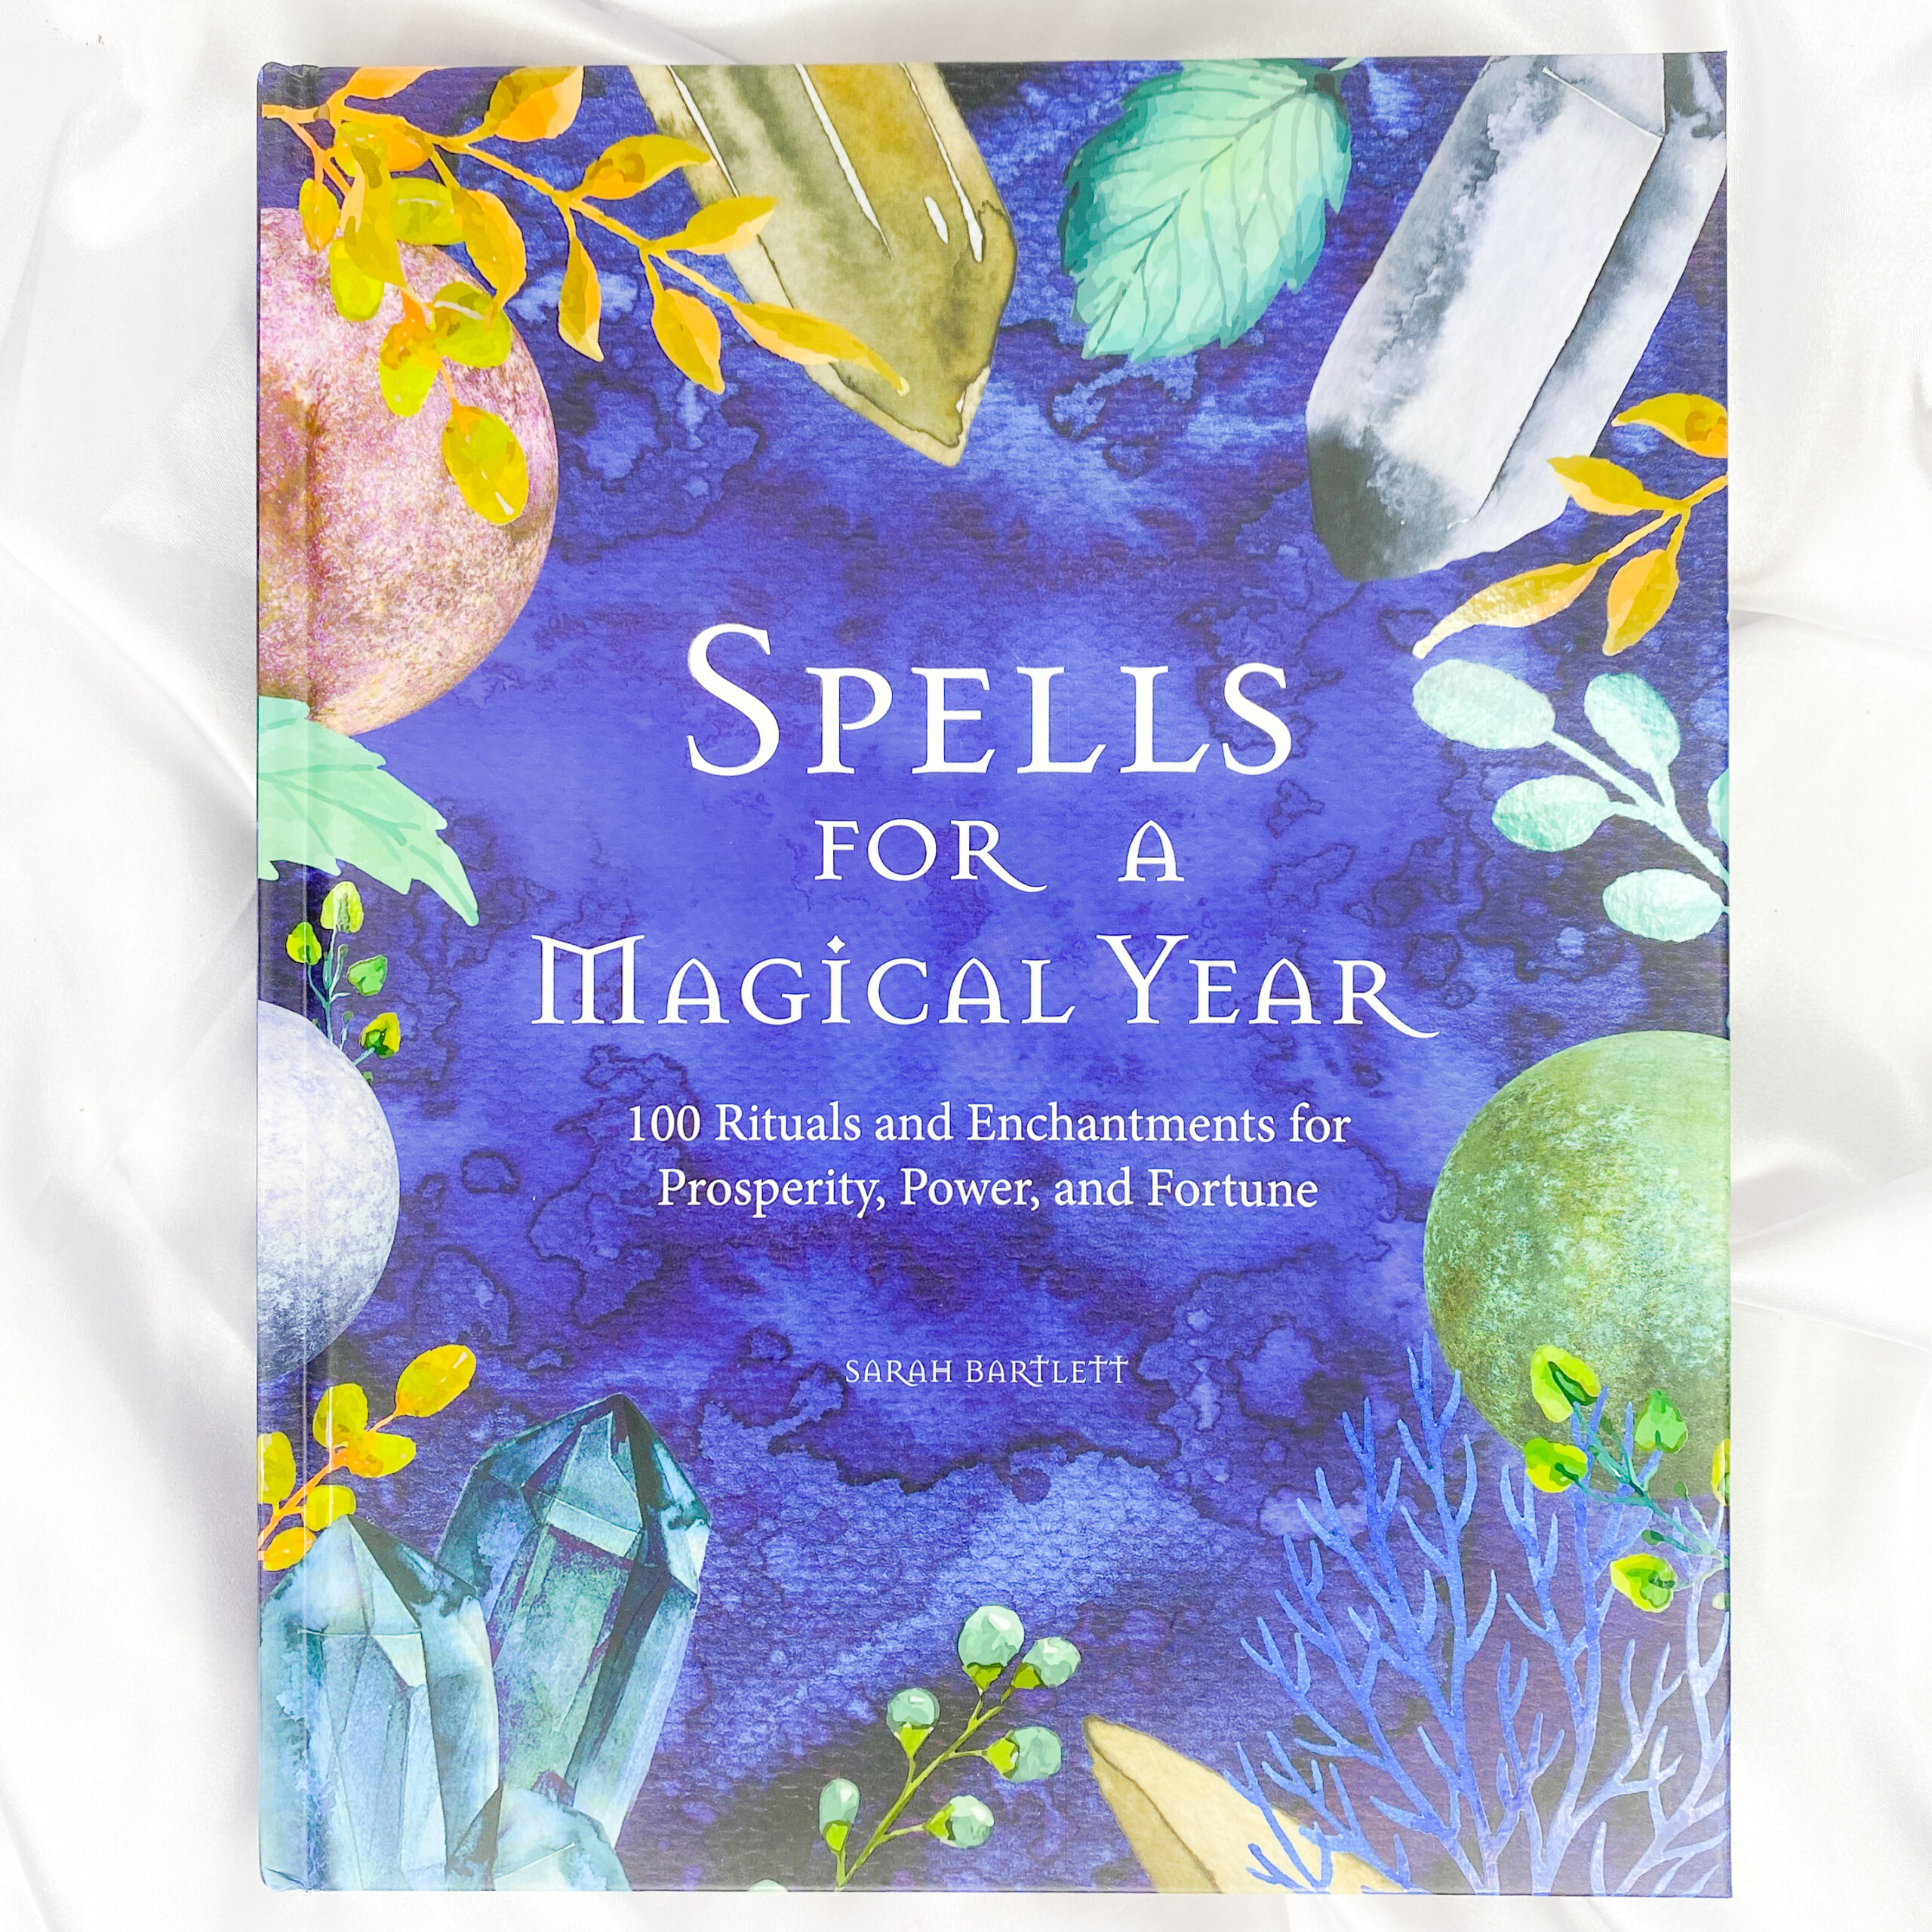 Spells For A Magical Year by Sarah Bartlett